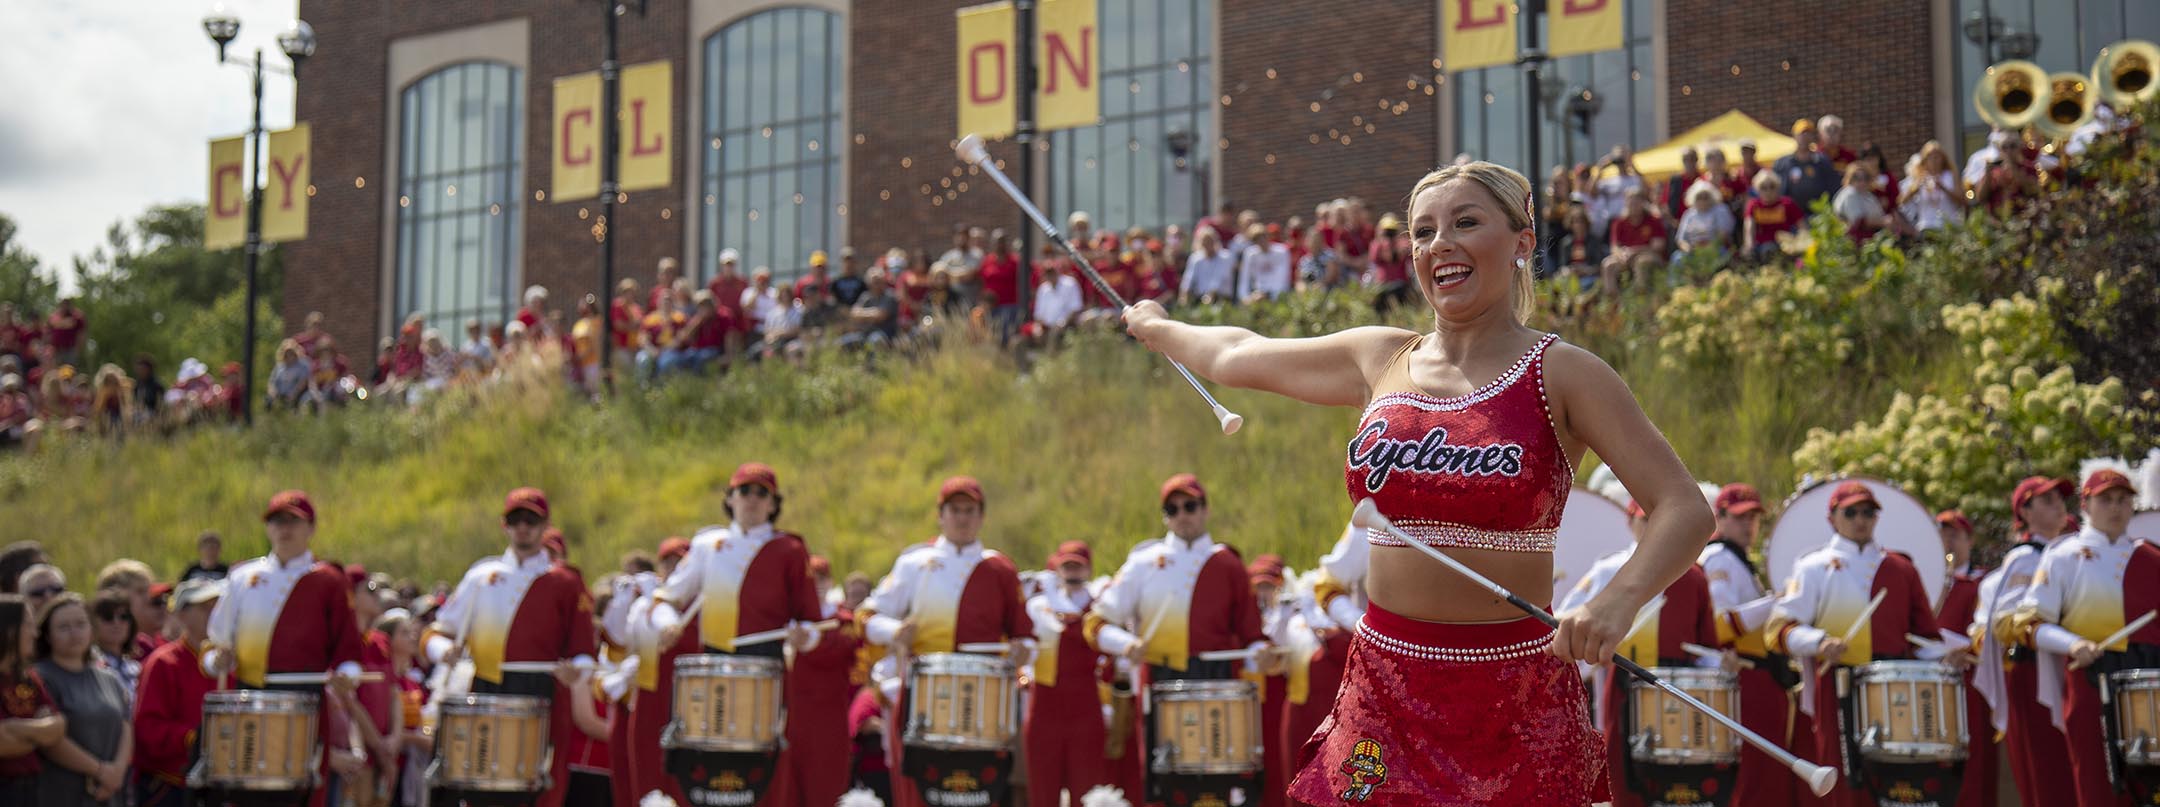 The marching band and twirler perform during a pregame pep rally outside the Alumni building